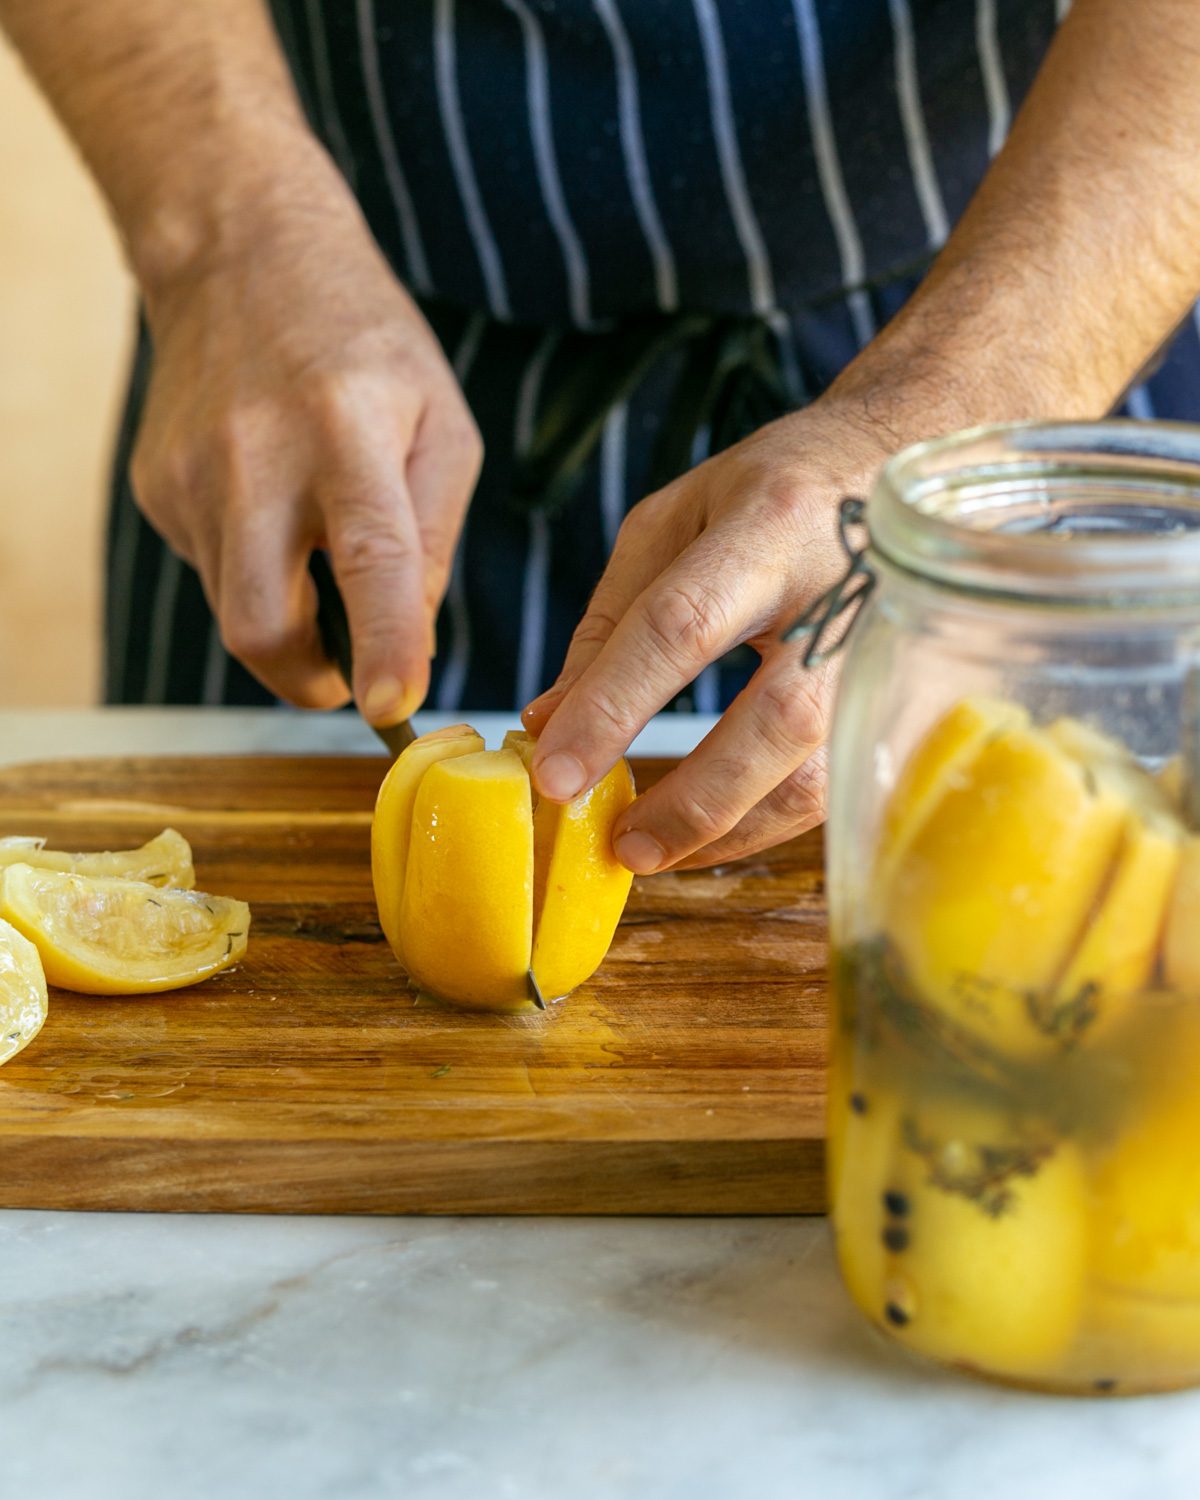 Cutting the preserved lemon in wedges